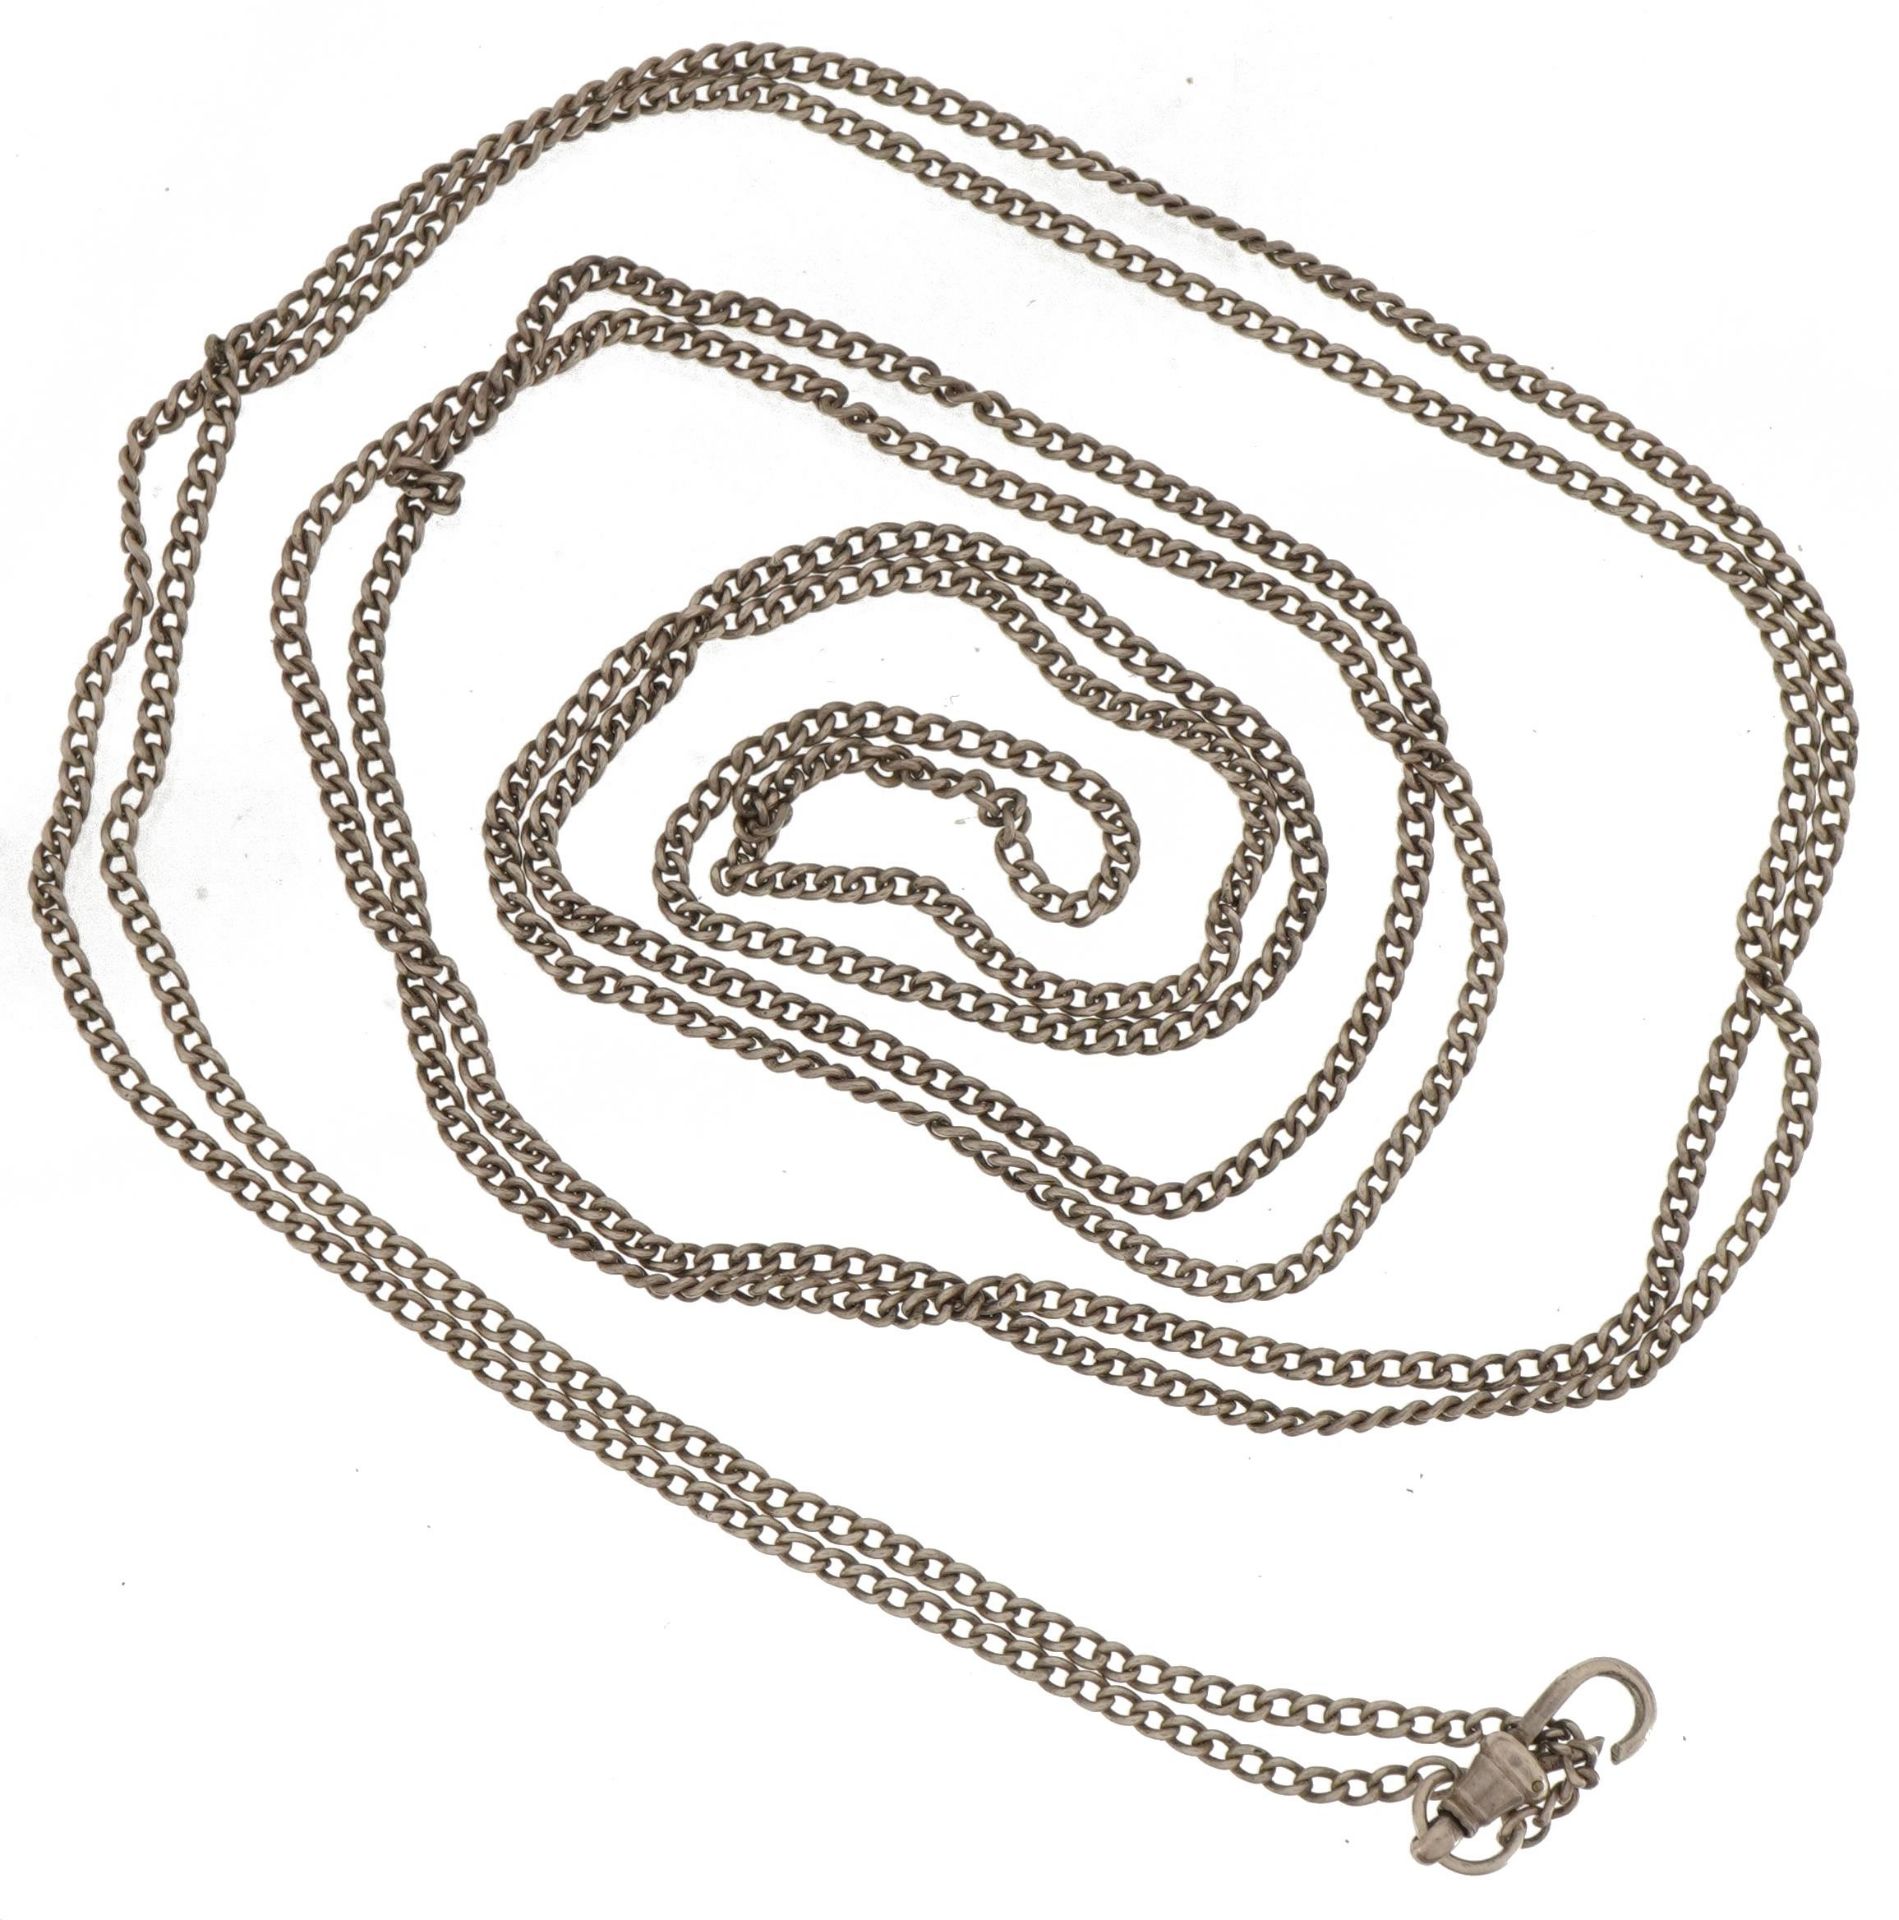 Silver Longuard watch chain with dog clip clasp, 75cm in length, 19.8g : For further information - Image 2 of 3